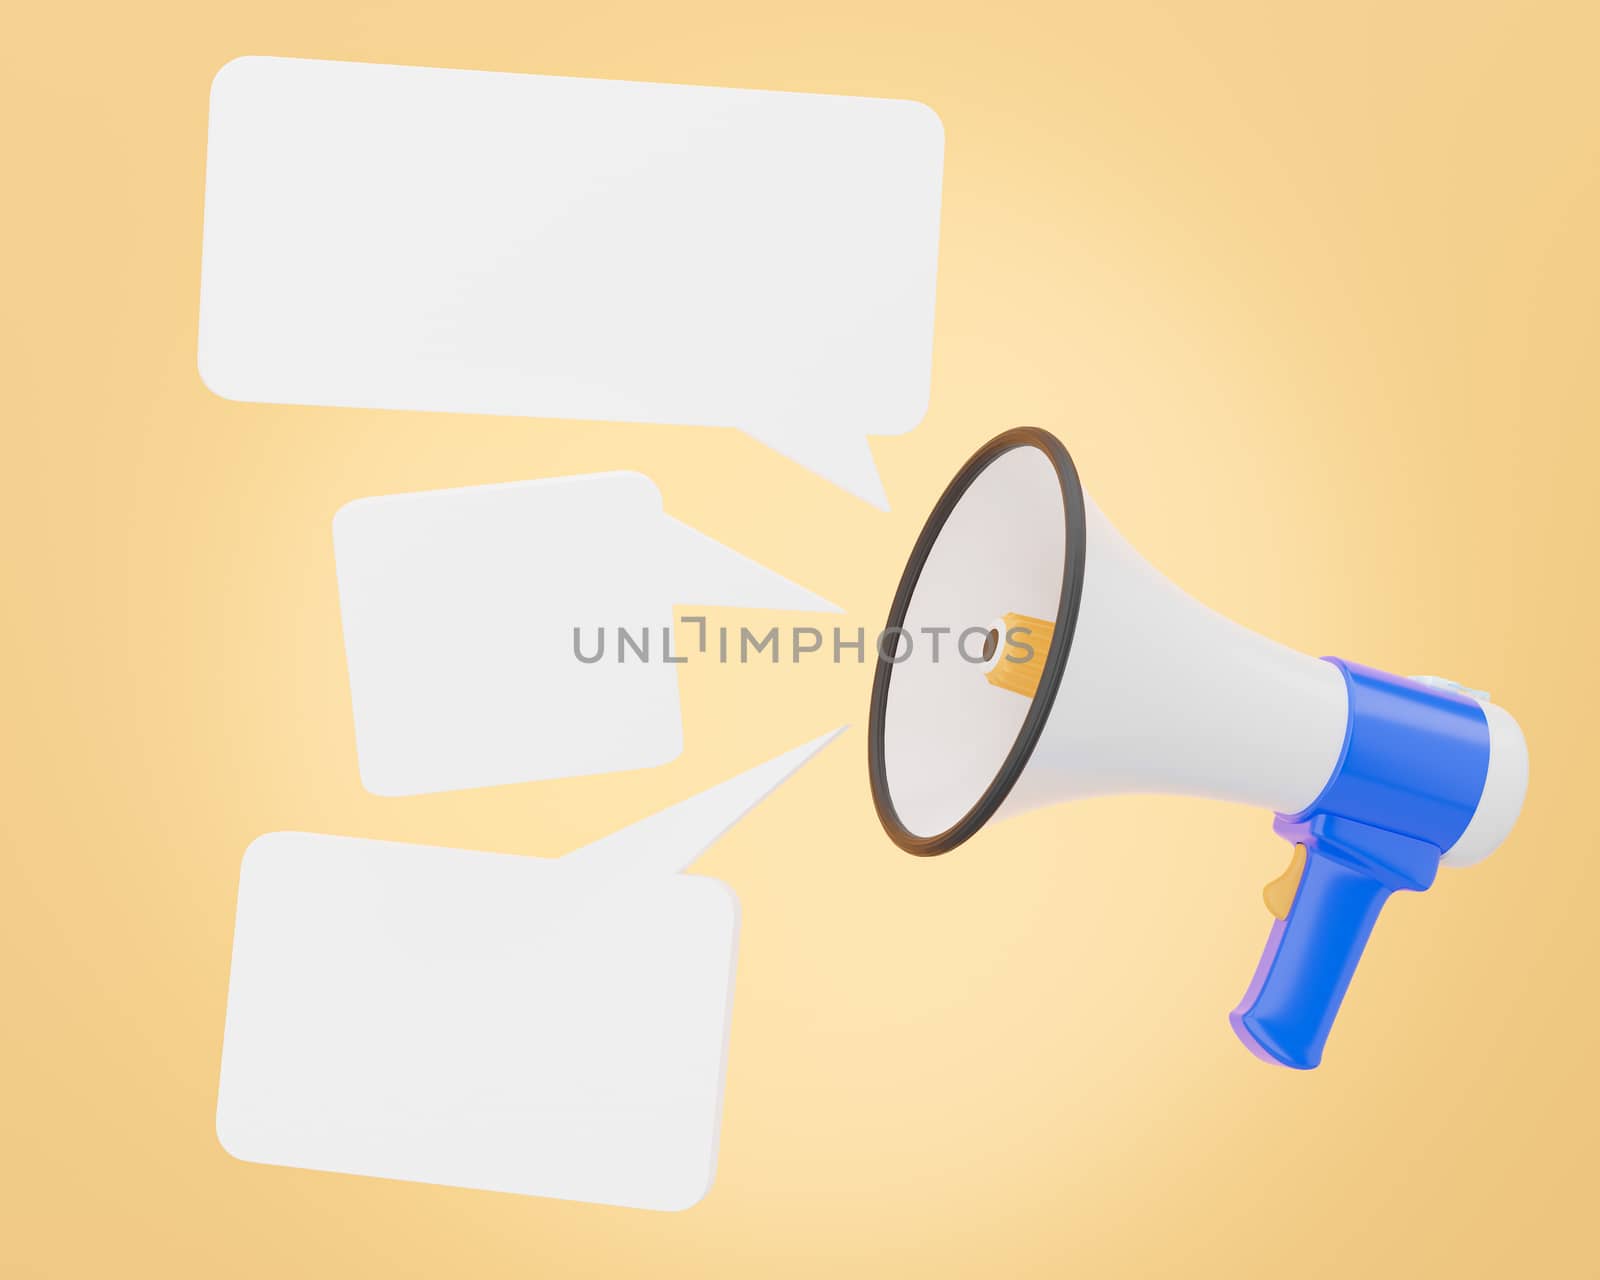 The megaphone is voicing notification sound and appears as an empty message box for advertising bullhorn or blue and white loudspeaker on orange background. Concept of communication. 3D illustration.